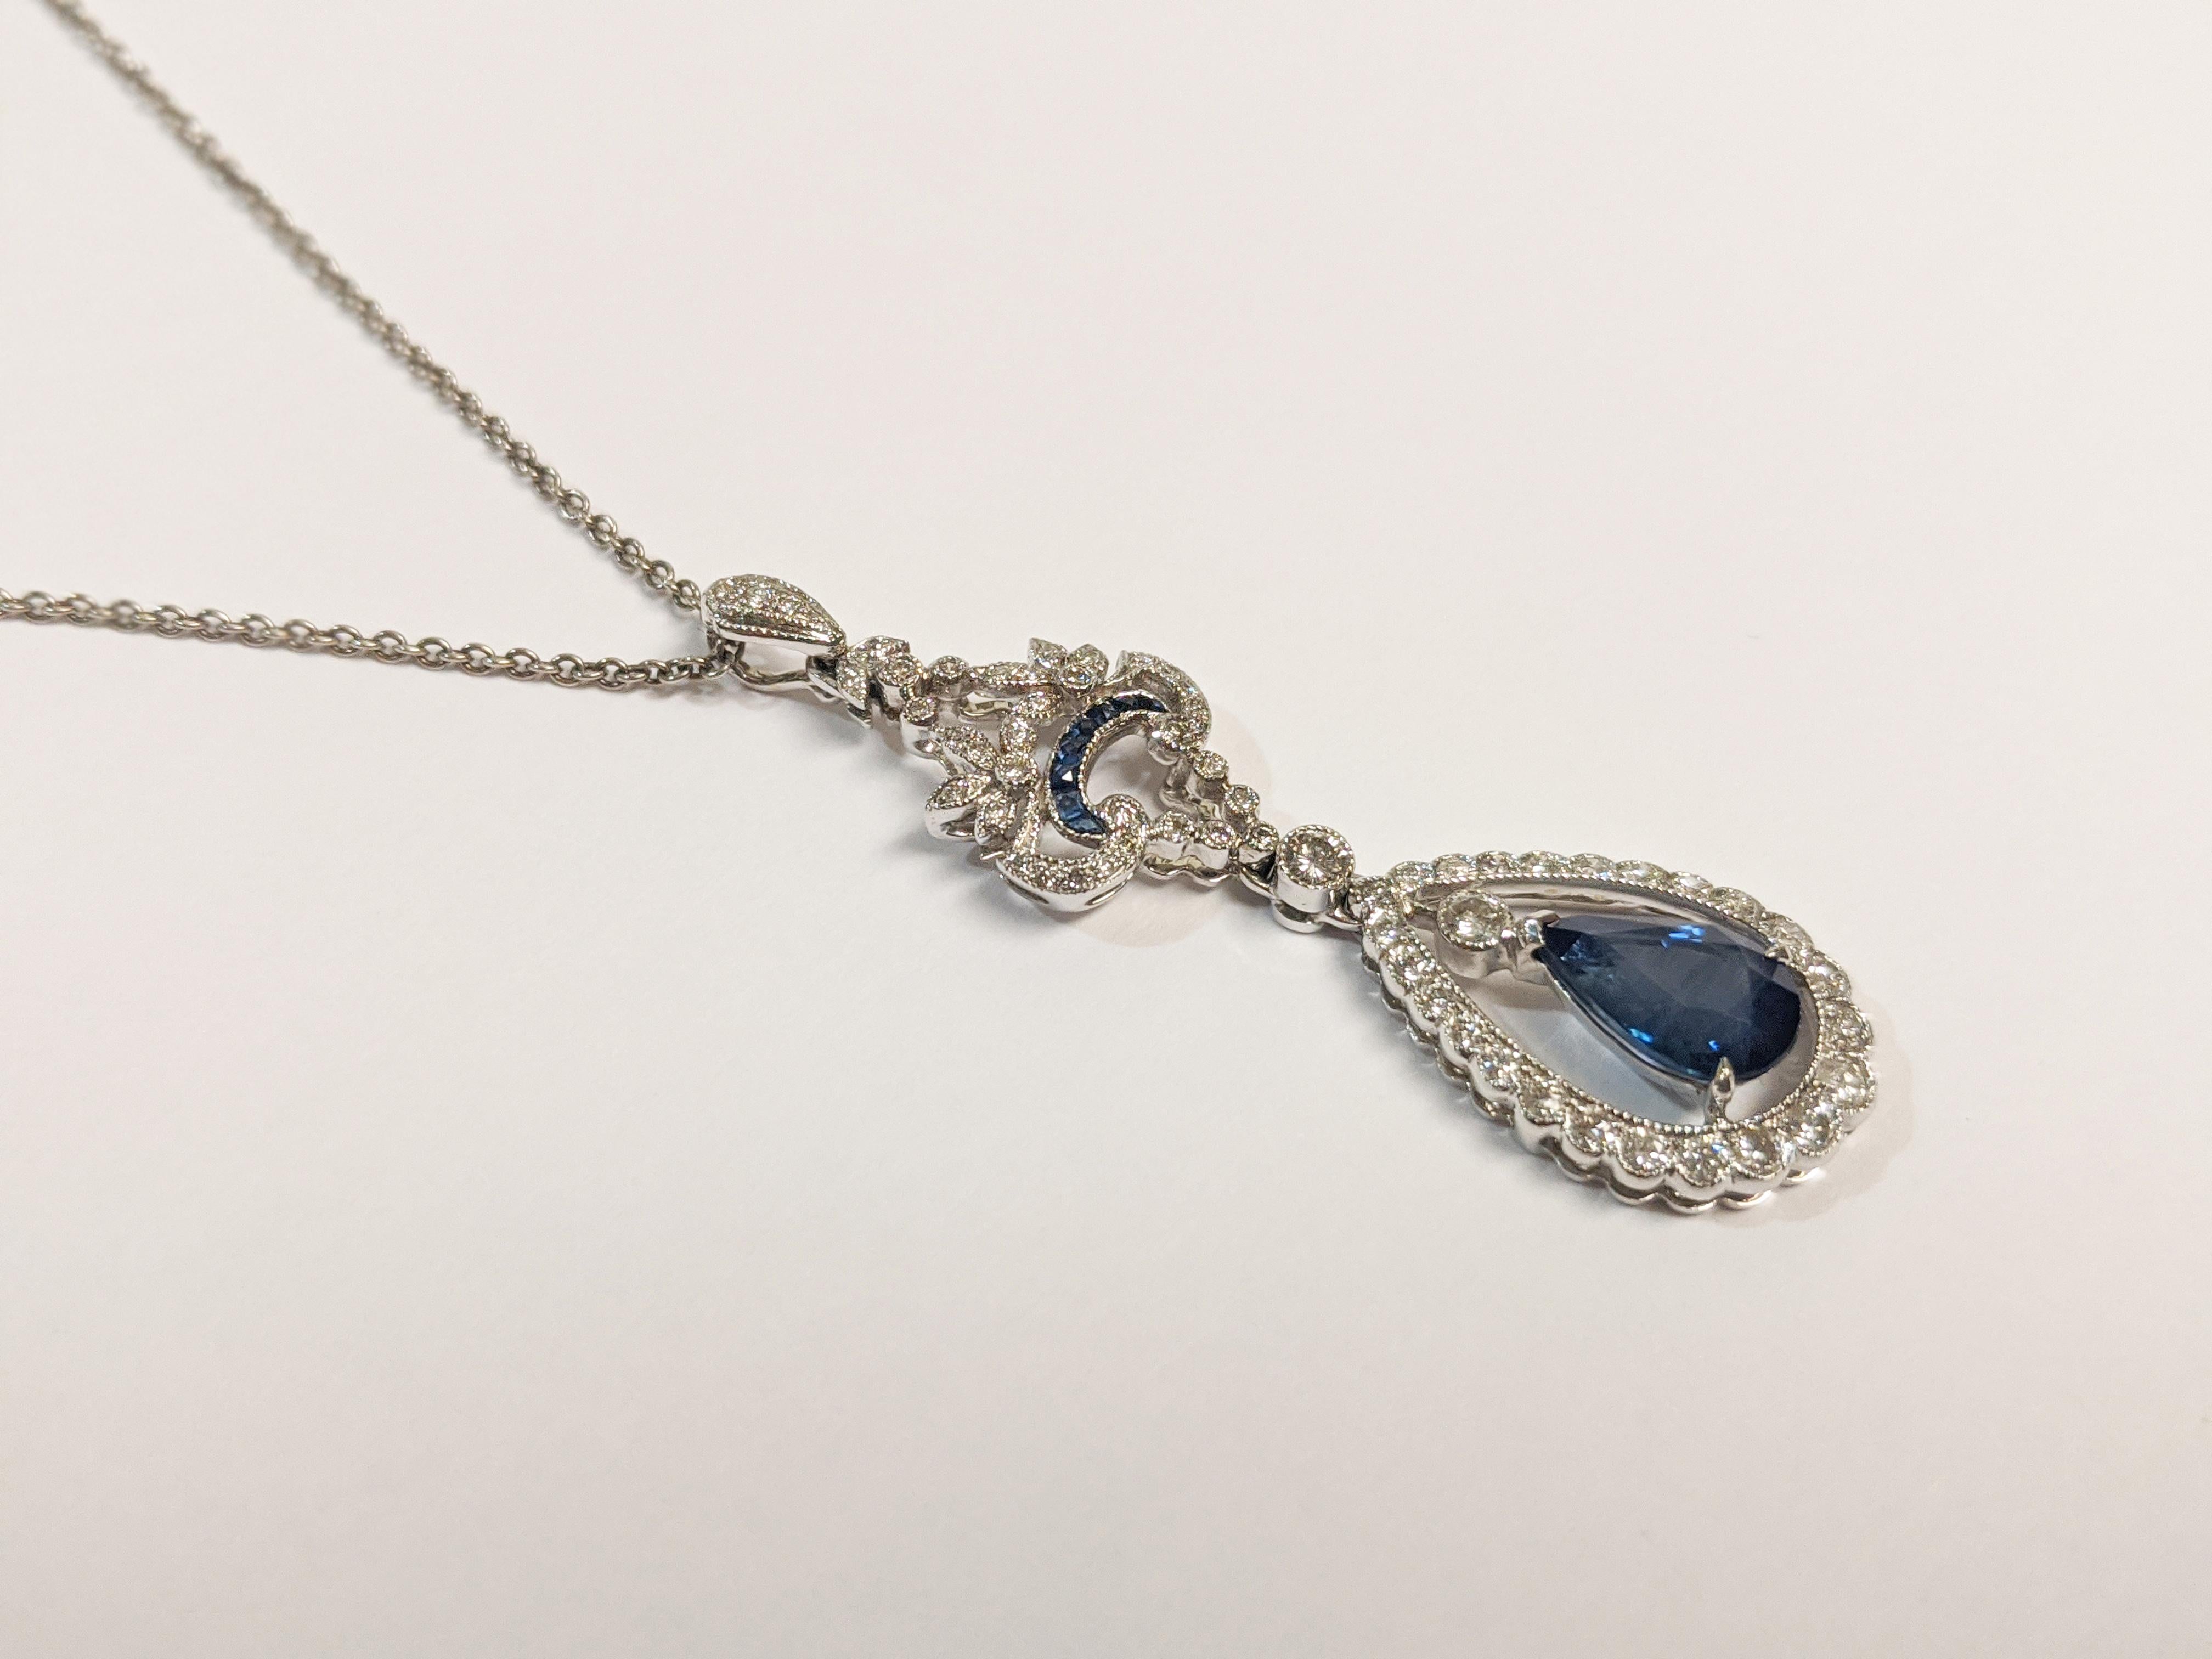 This Art Deco style drop pendant features one pear-shaped blue sapphire of nearly two carats.  Surrounding the center stone are more than 50 round diamonds that sparkle from a scrolling setting. Eight French-cut blue sapphires accentuate the